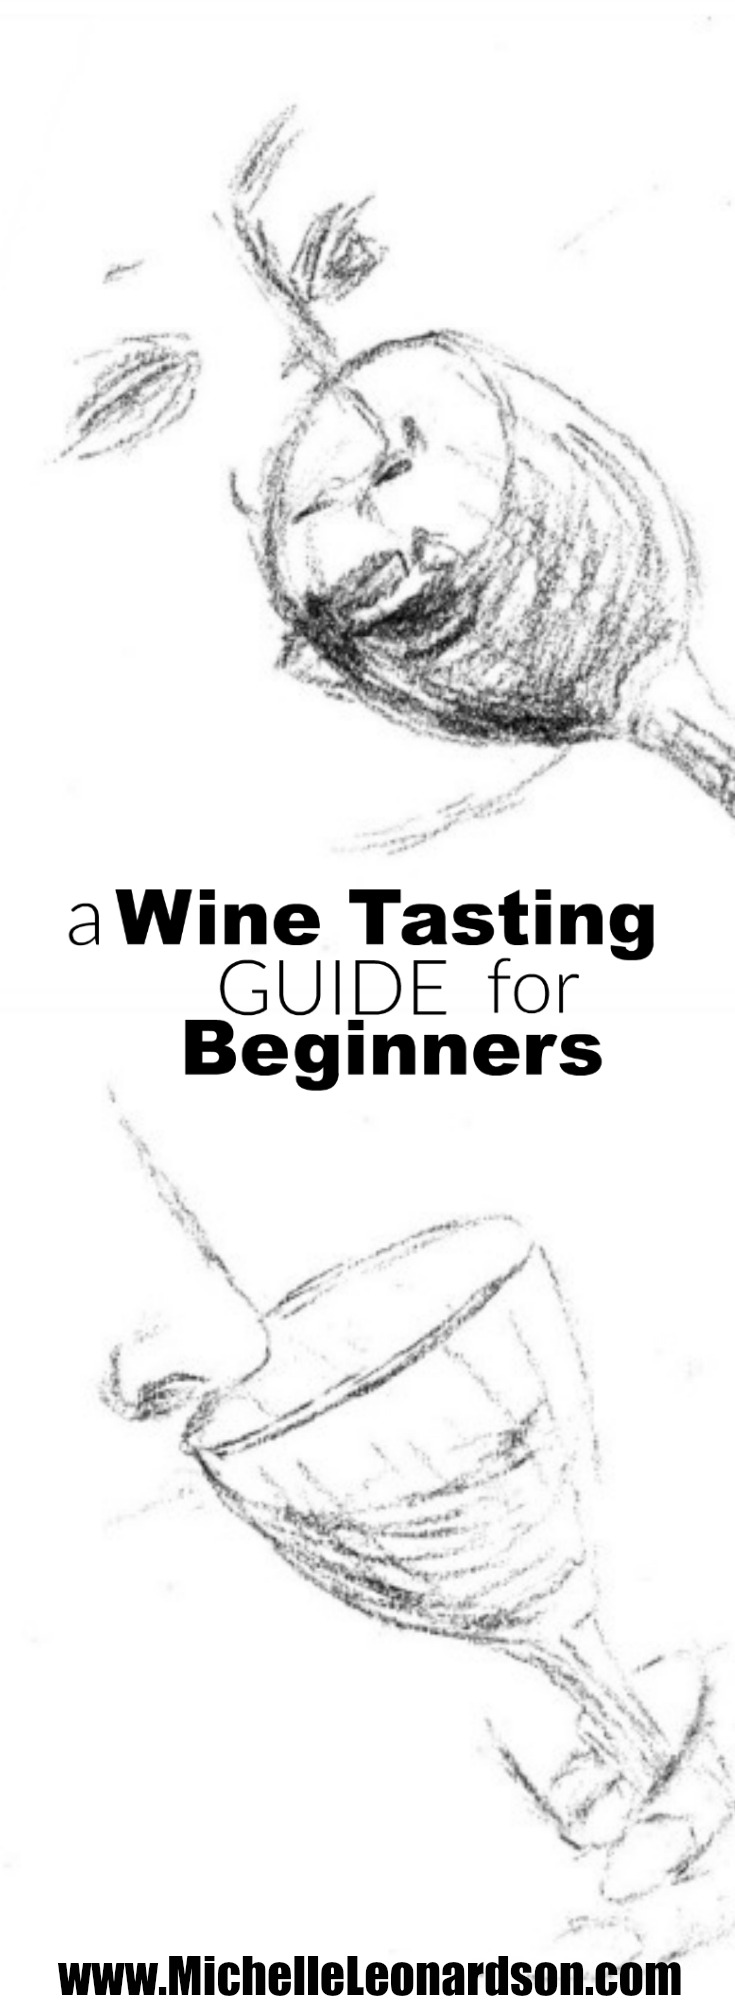 Intimidated by wine tasting? The ritual can seem overly complicated and drawn-out for those new to the experience. Enhance your next wine tasting with this guide because understanding the process will increase the lifetime enjoyment you receive from wine.